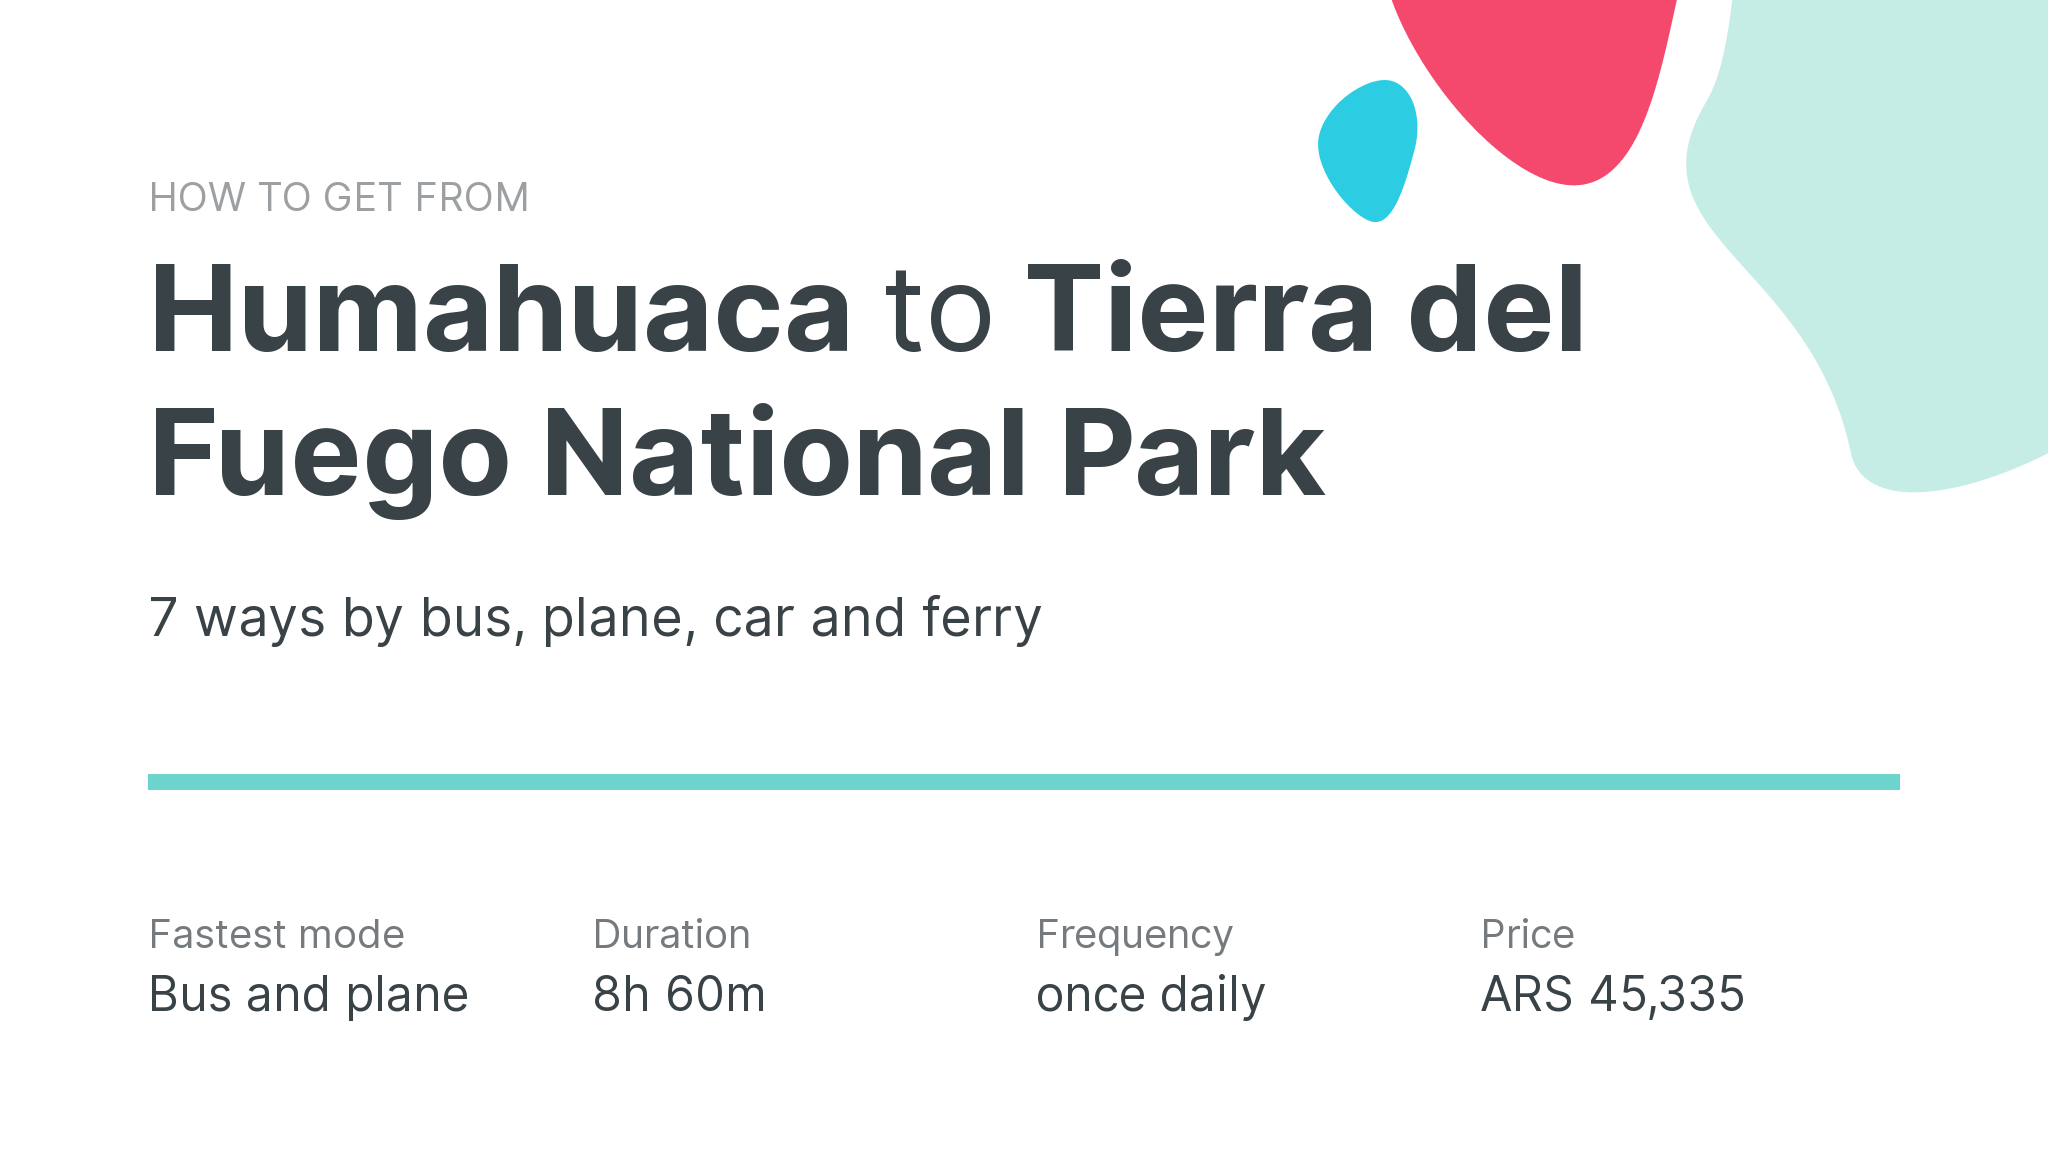 How do I get from Humahuaca to Tierra del Fuego National Park